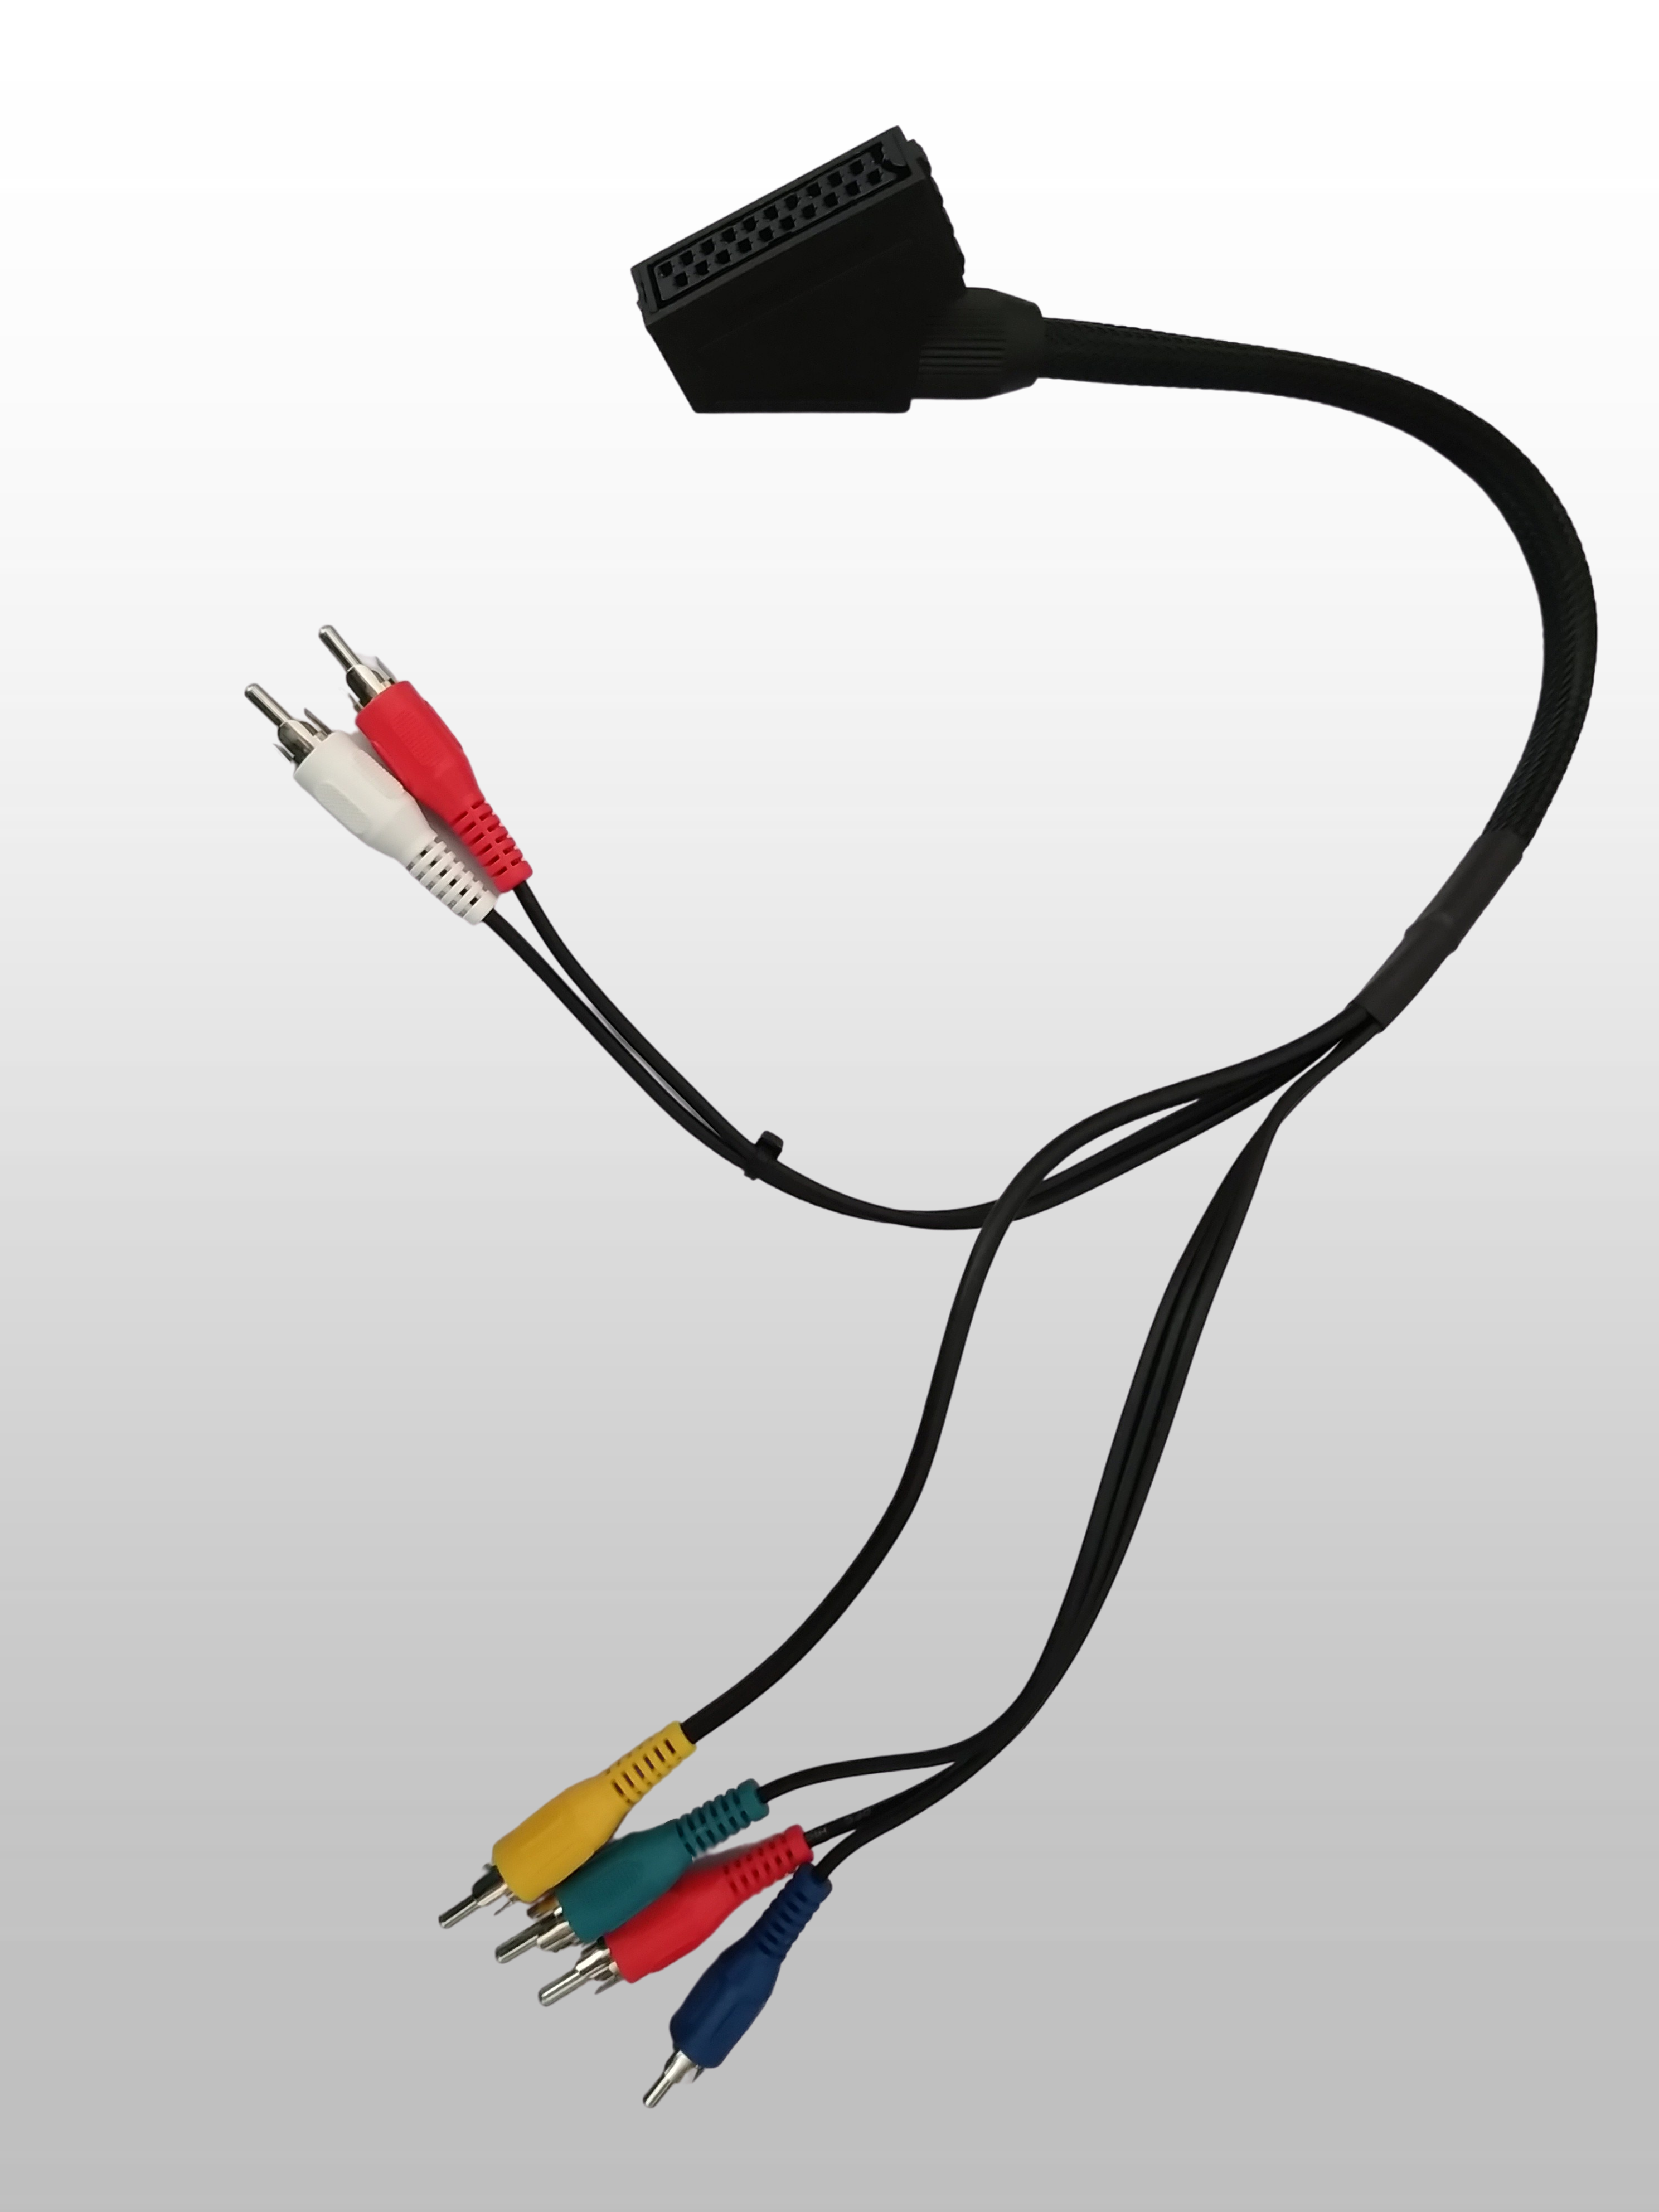 Product image of Upscaler Adaptor Cable for the Taxon Scart Switch